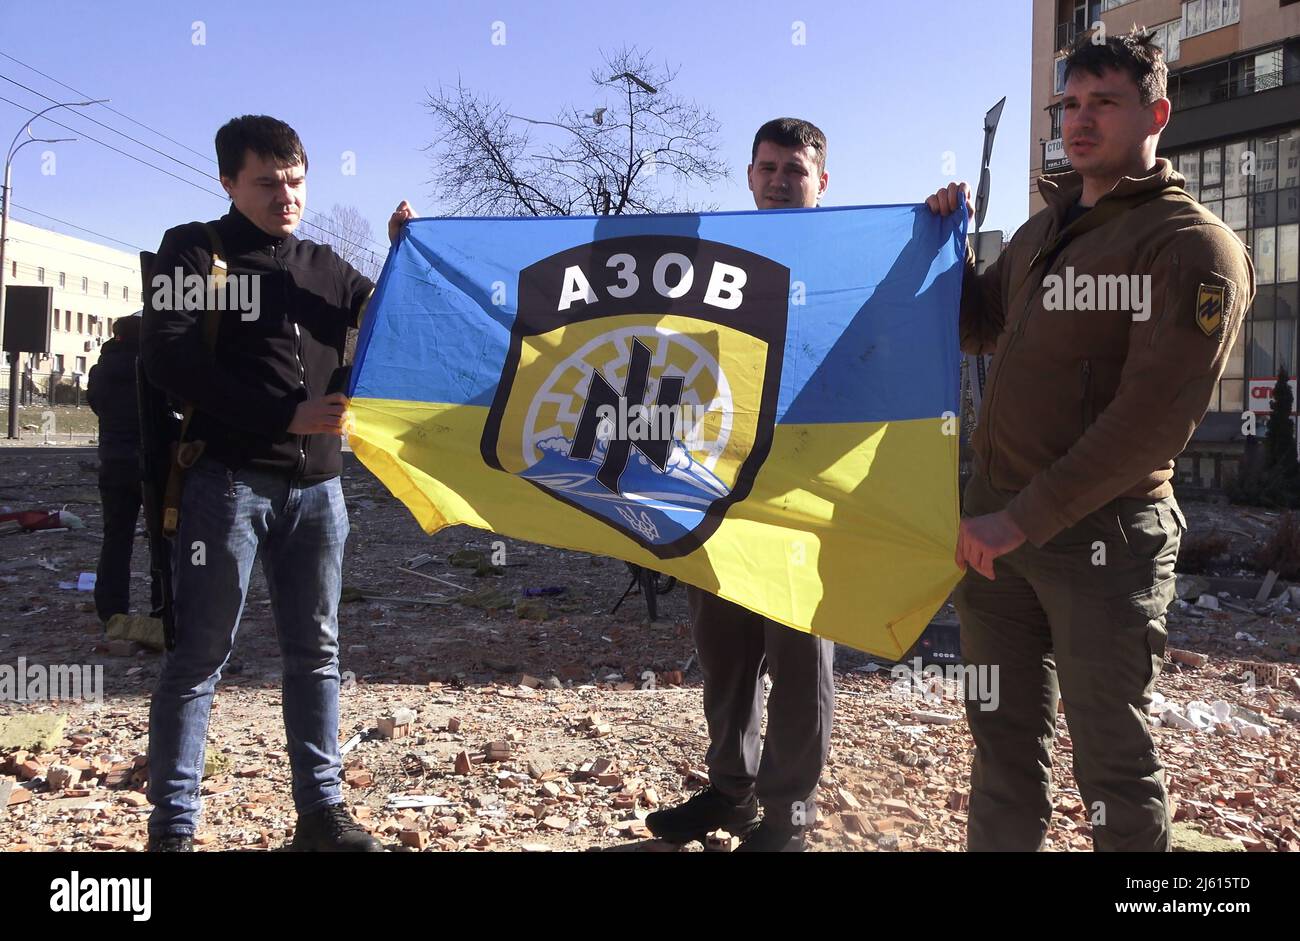 KYIV, UKRAINE 28 FEBRUARY. Azov affiliated volunteers hold their far right battalion flag at the site of a damaged residential building following a rocket attack on 28 February 2022 in Kiev, Ukraine. Azov is a far-right all-volunteer infantry military unit whose members, estimated at 900, are ultra-nationalists and accused of harbouring neo-Nazi and white supremacist ideology. Russia began a military invasion of Ukraine after Russia's parliament approved treaties with two breakaway regions in eastern Ukraine. It is the largest military conflict in Europe since World War II. Stock Photo